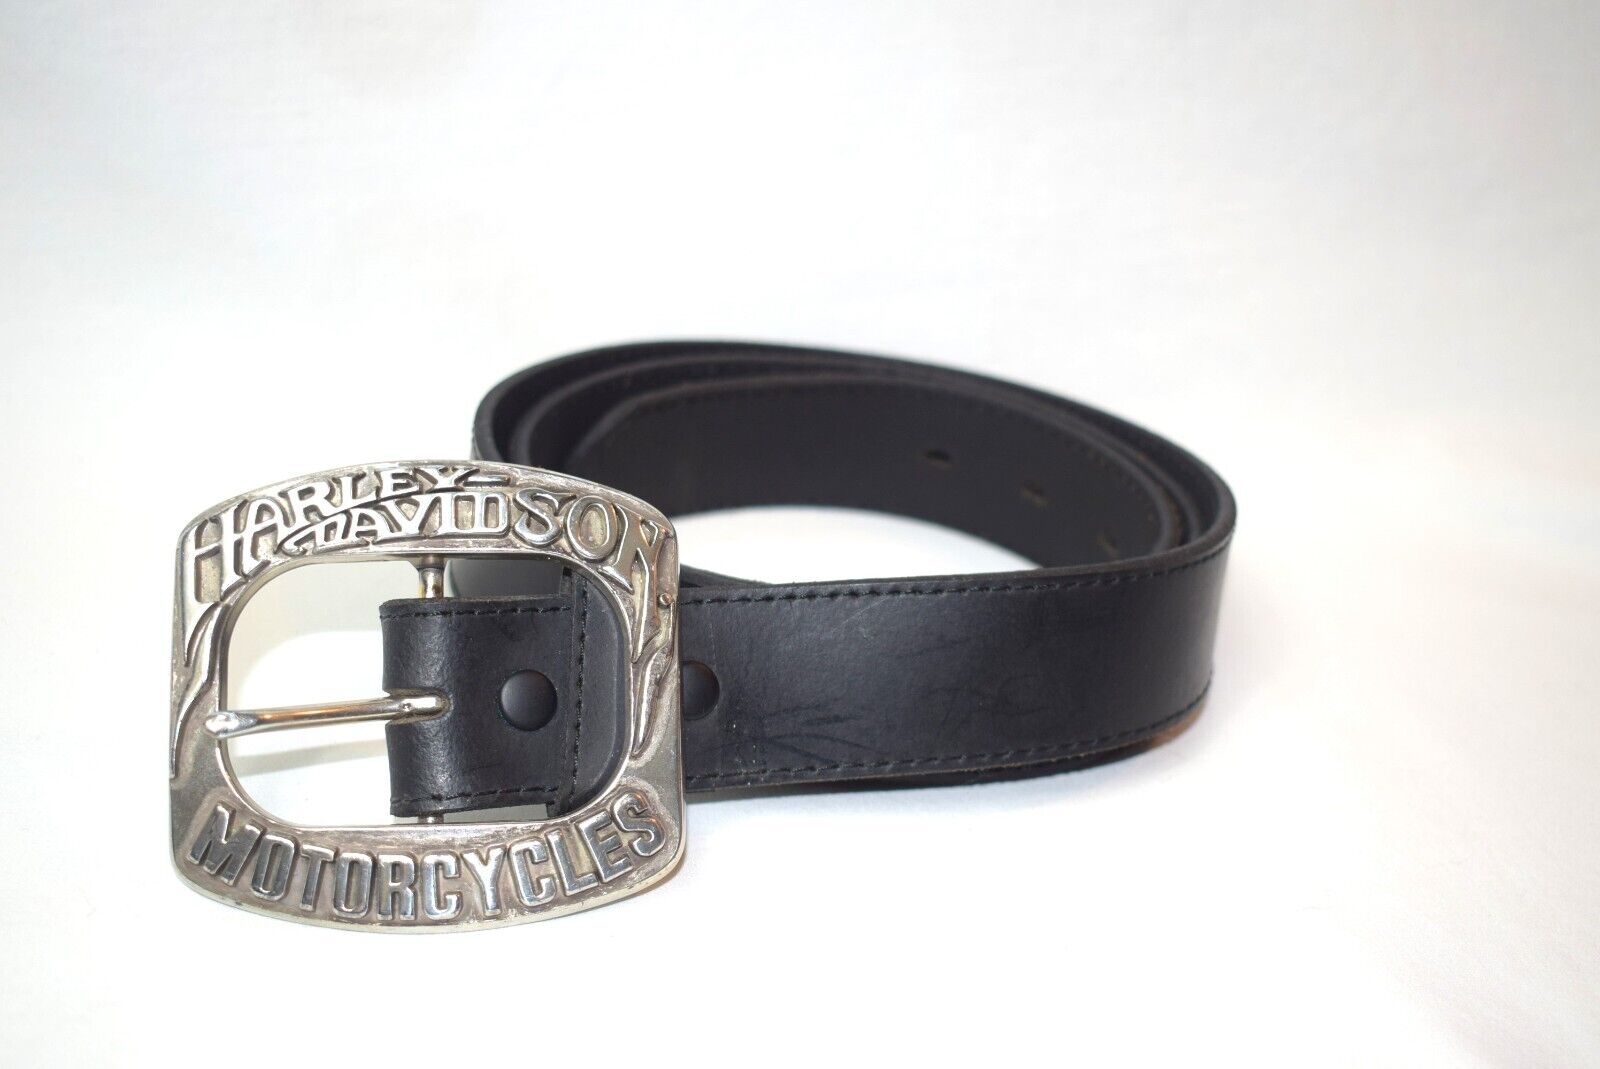 2005 Harley-Davidson Silver Buckle with Black Leather 47 inch Belt